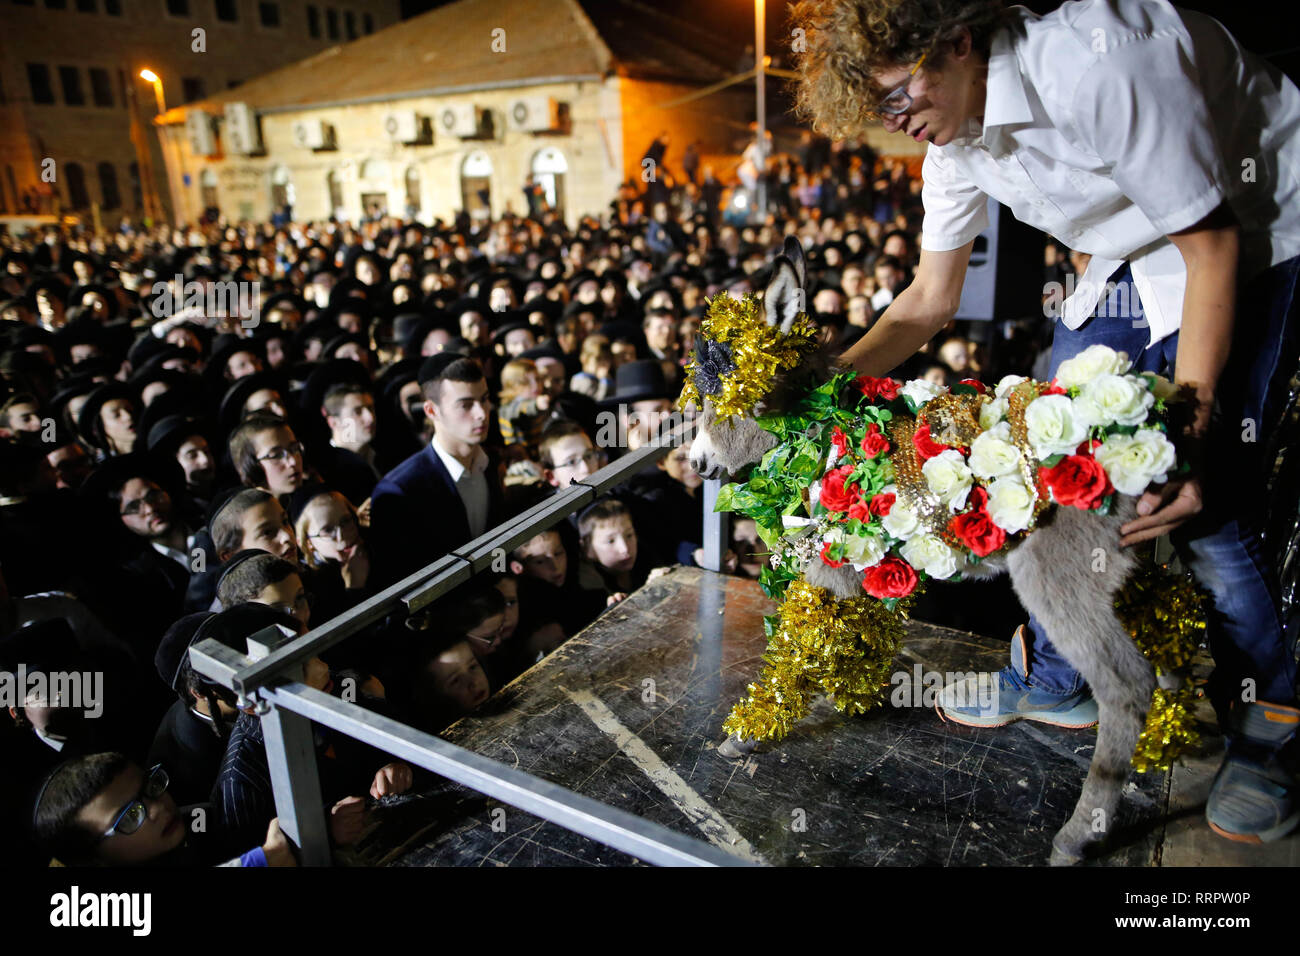 (190226) -- JERUSALEM, Feb. 26, 2019 (Xinhua) -- Ultra-Orthodox Jews take part in the ritual 'Peter Chamor' ceremony in Mea Shearim neighborhood in Jerusalem, on Feb. 25, 2019. 'Peter Chamor', or redemption of the firstborn donkey, is a ceremony where a firstborn donkey is given to the Cohen (Jewish priest) as a gift, then redeemed by the owner of the donkey with a kosher animal or money. (Xinhua/Gil Cohen Magen) Stock Photo